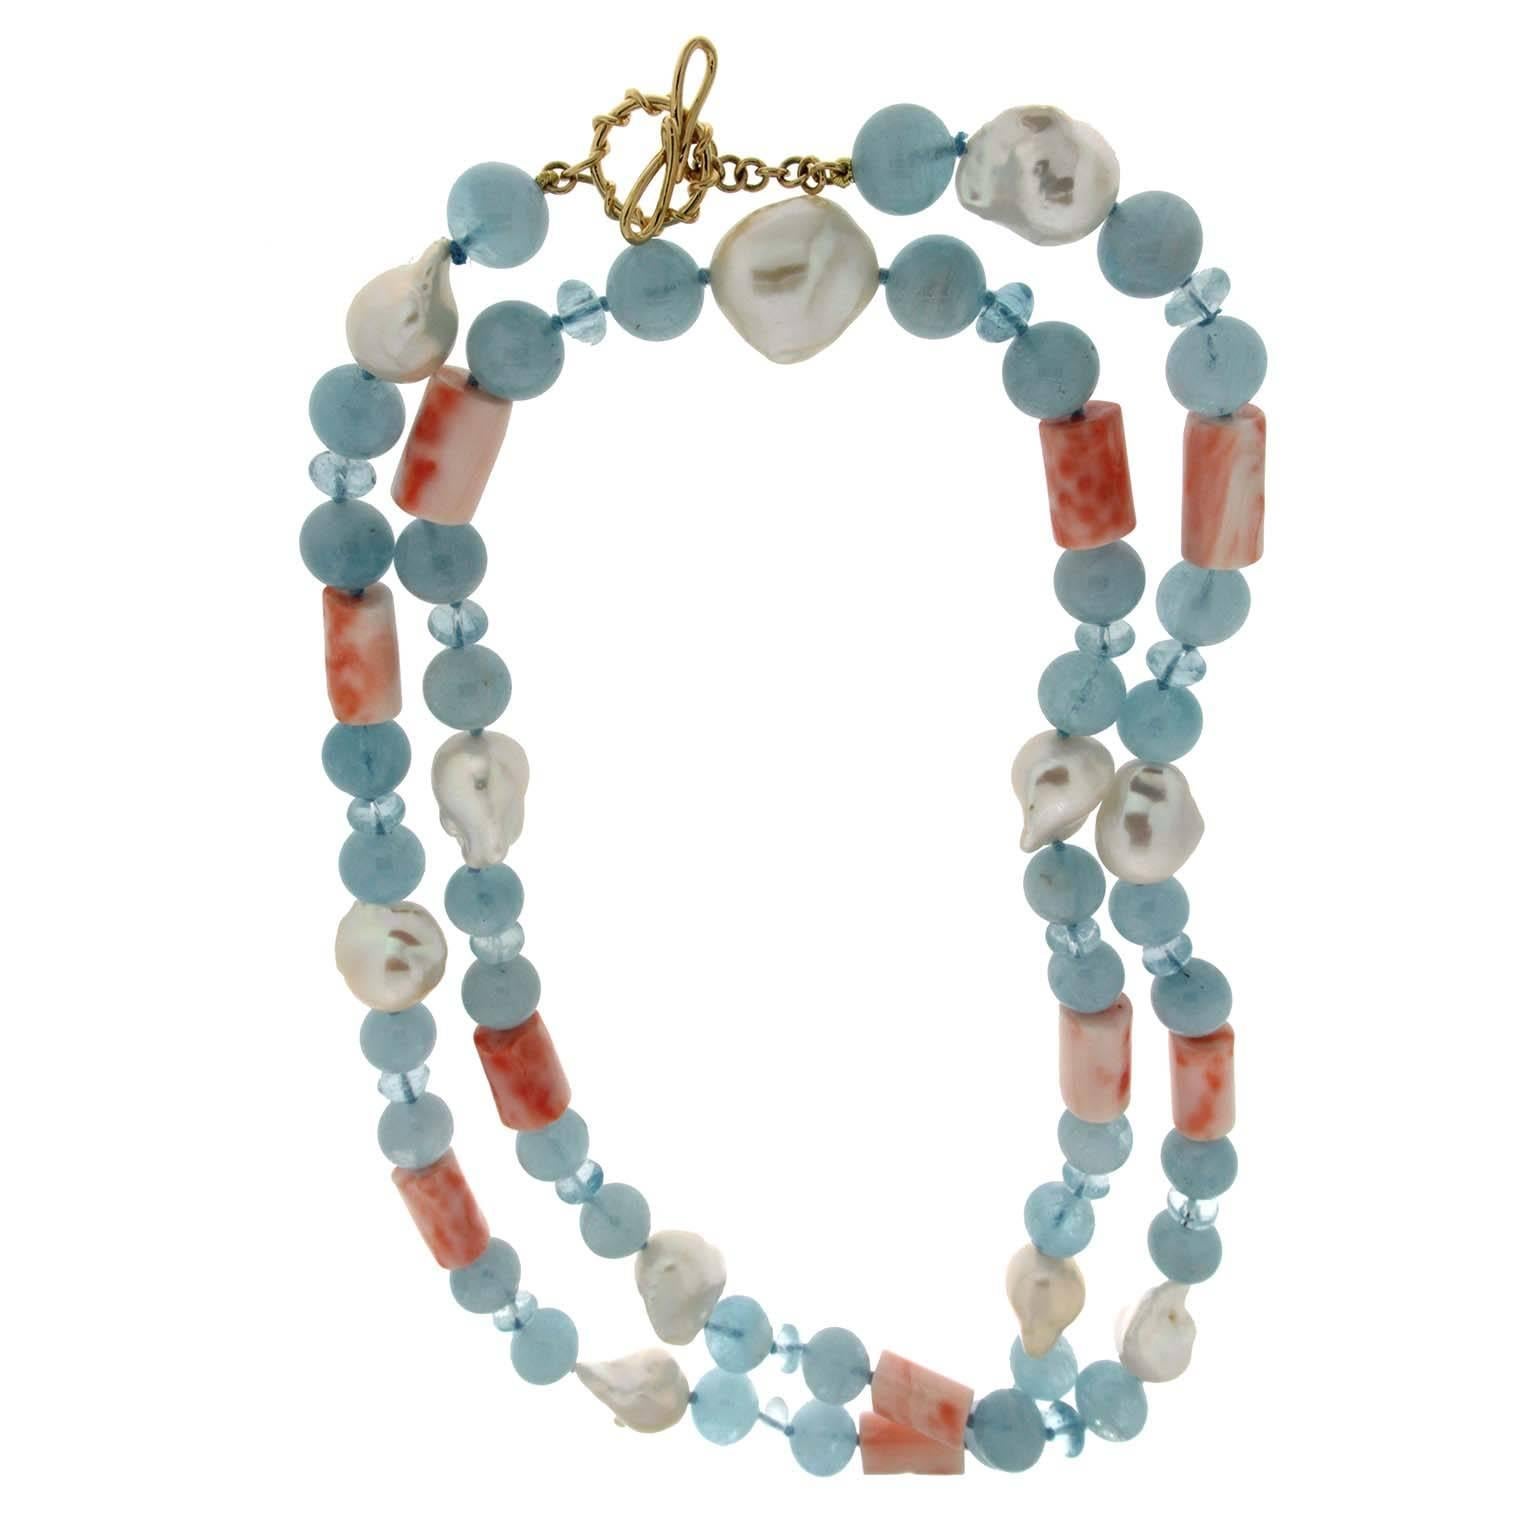 This necklace features a strand of coral tubes, aquamarine balls, and fresh water baroque pearls, it is complete with an 18kt yellow gold ring and toggle clasp. 